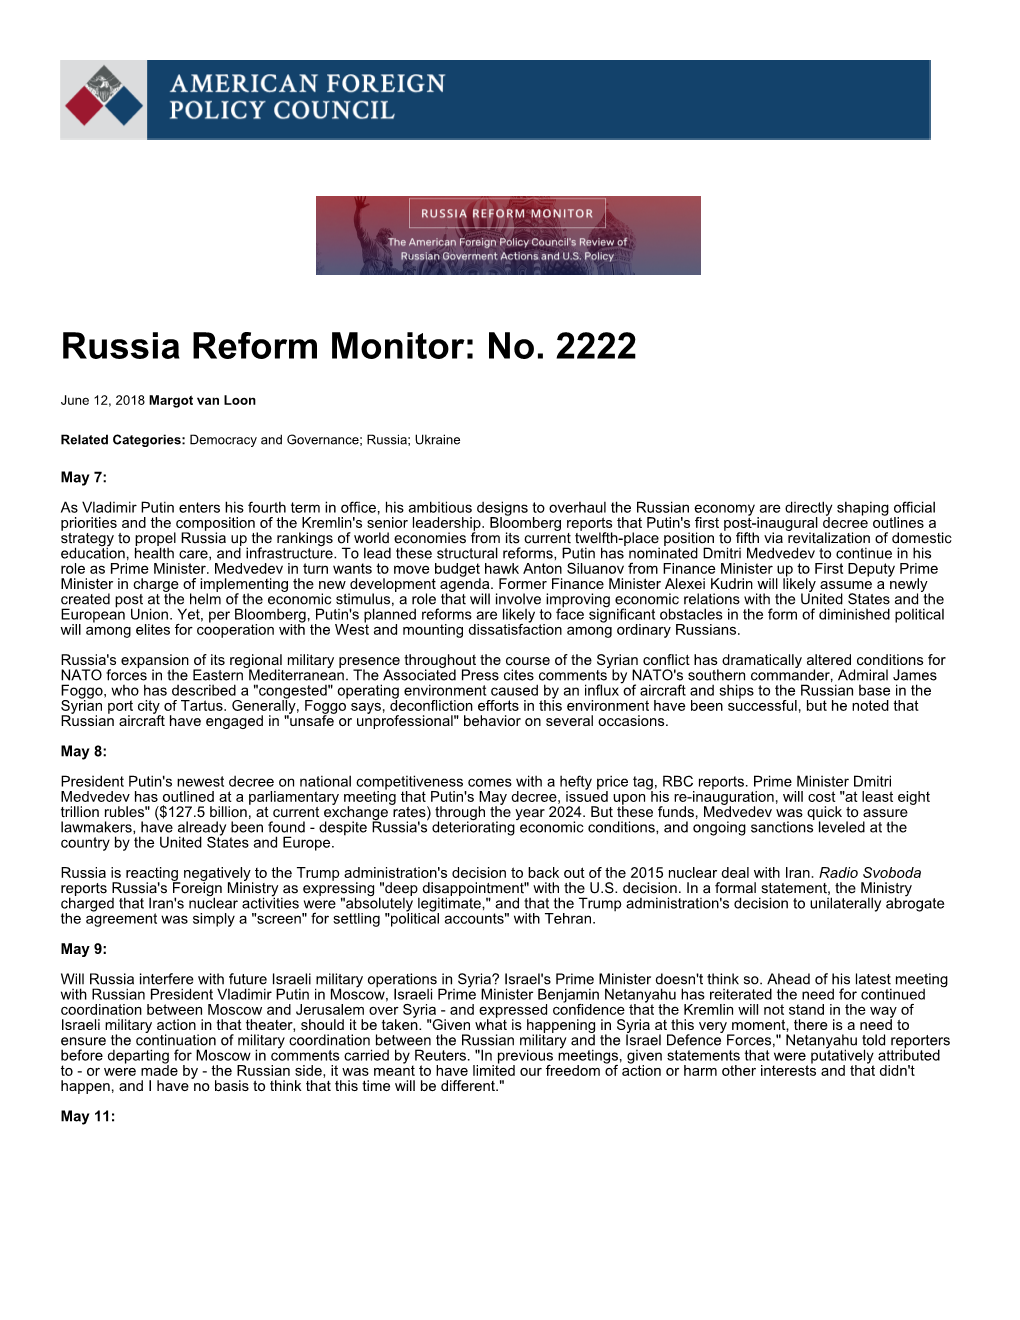 Russia Reform Monitor: No. 2222 | American Foreign Policy Council